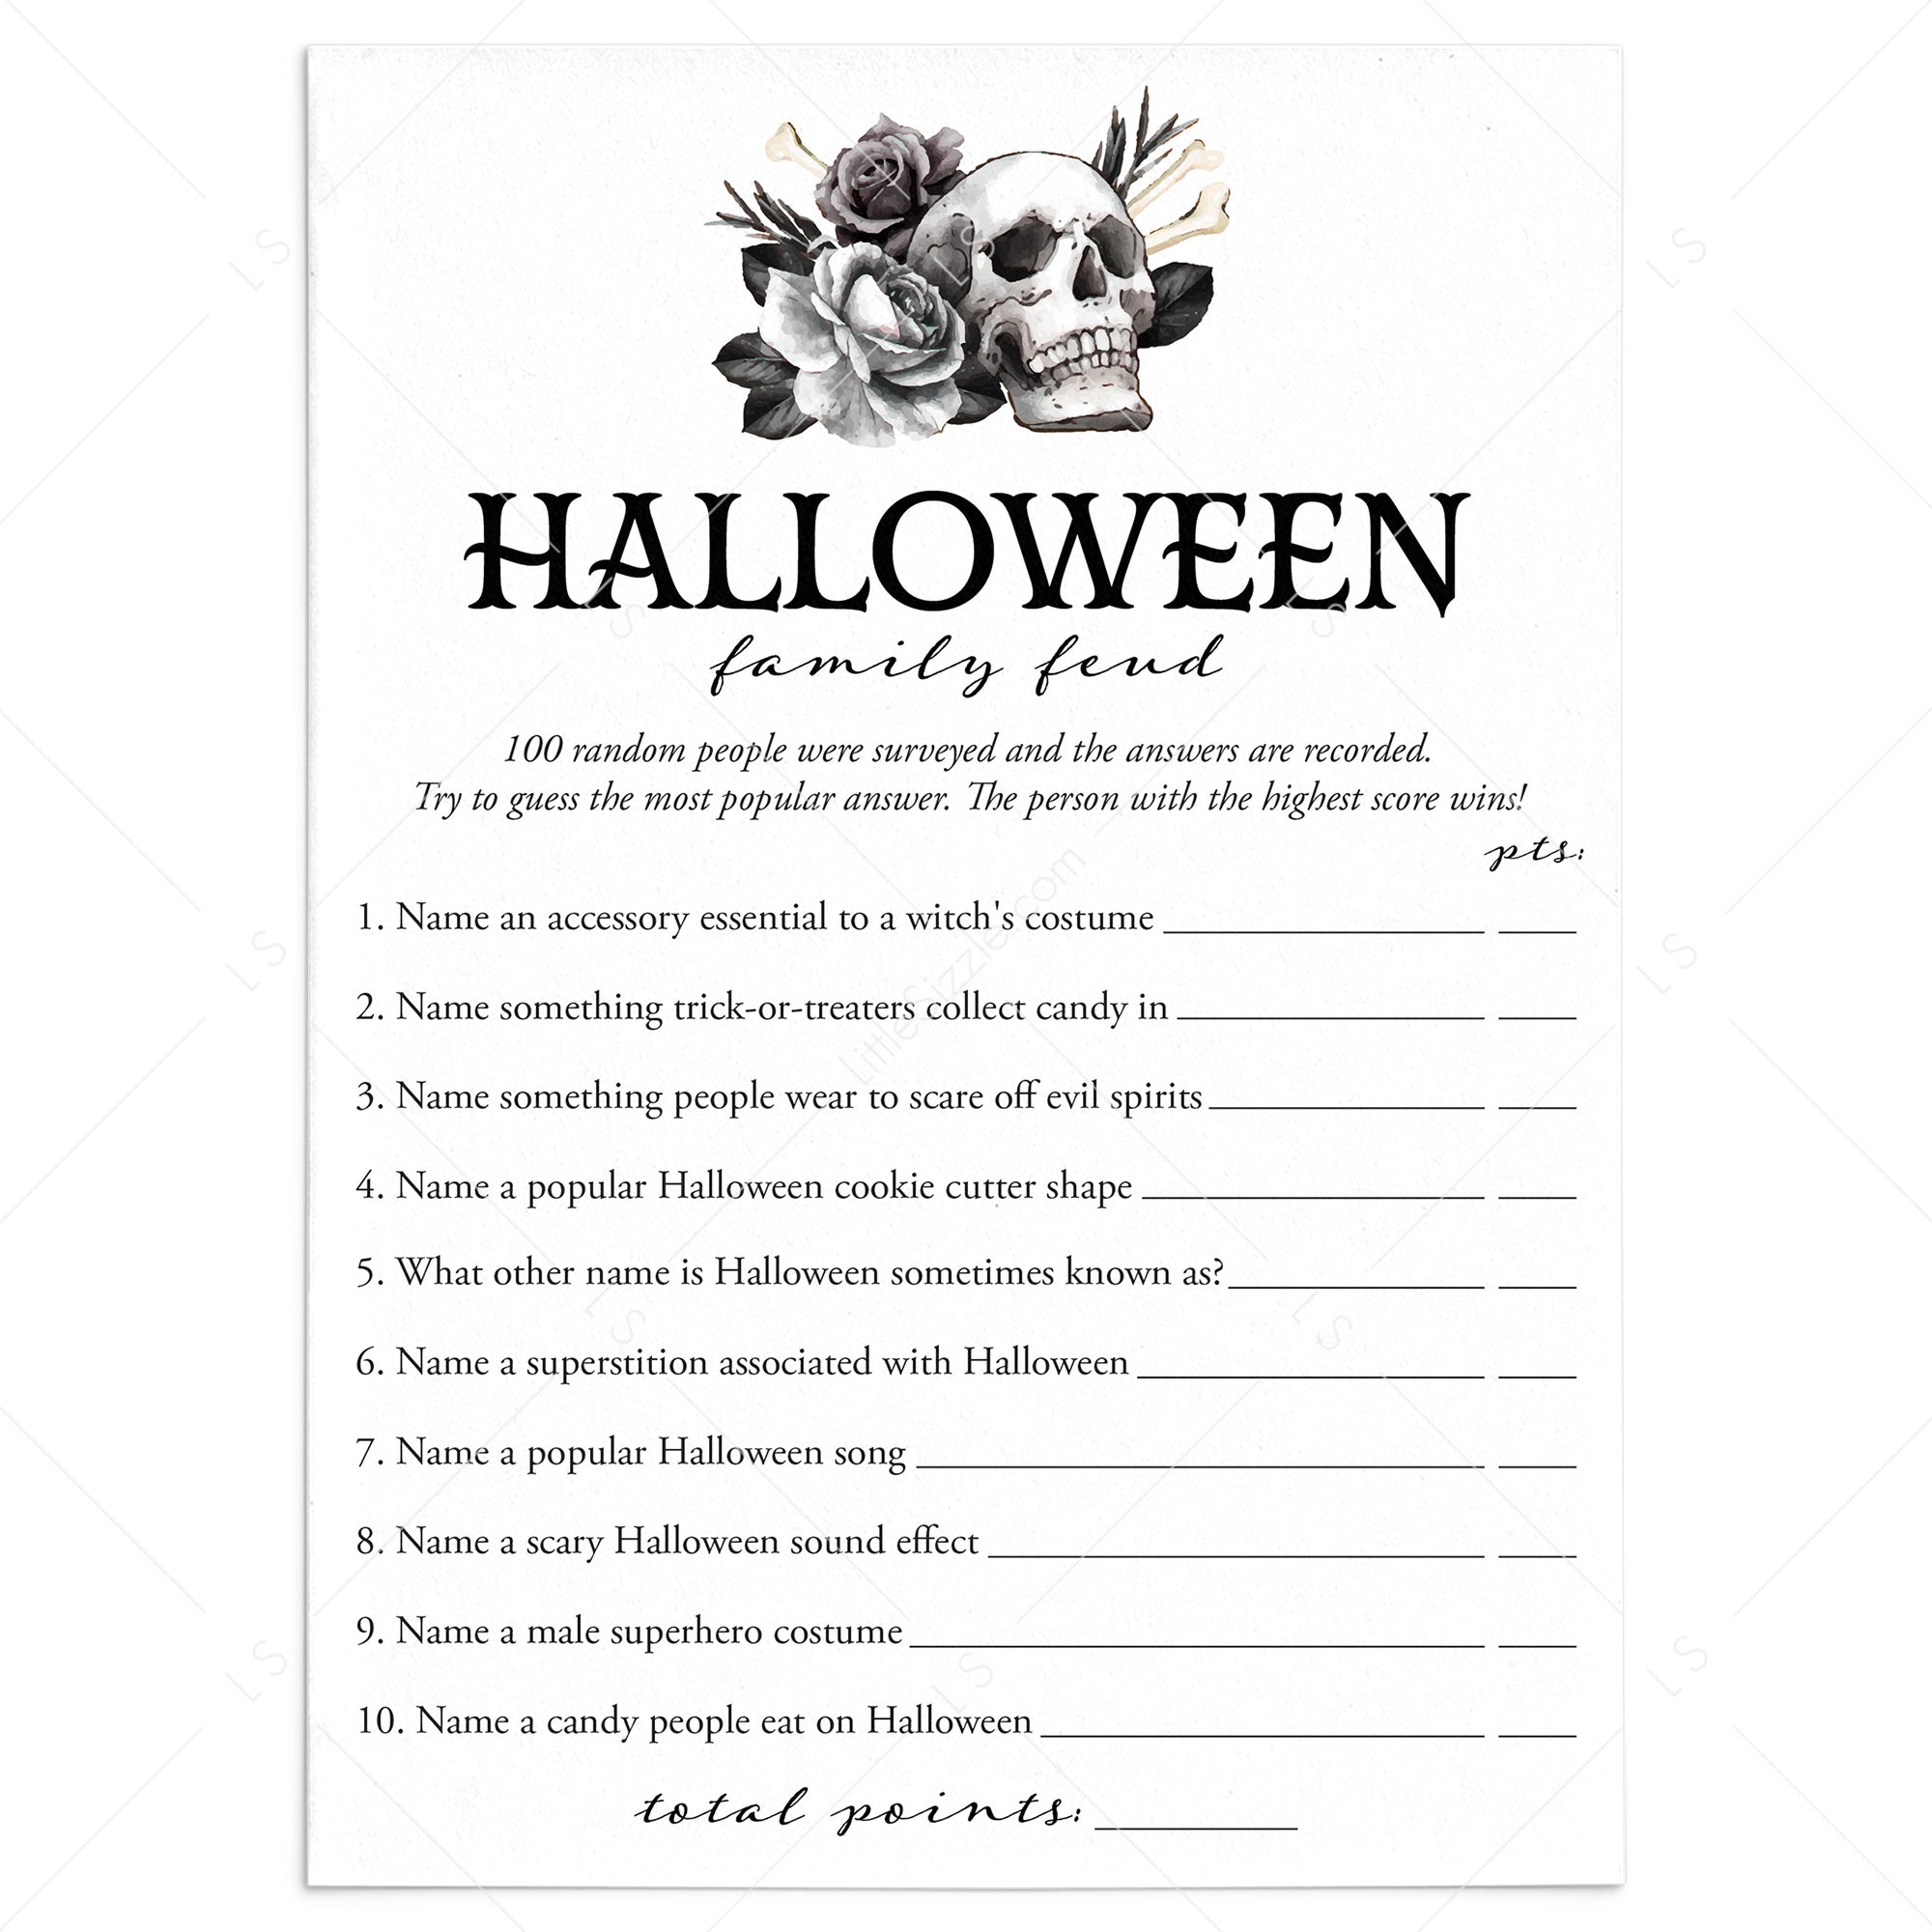 Halloween Family Feud with Answers Printable by LittleSizzle